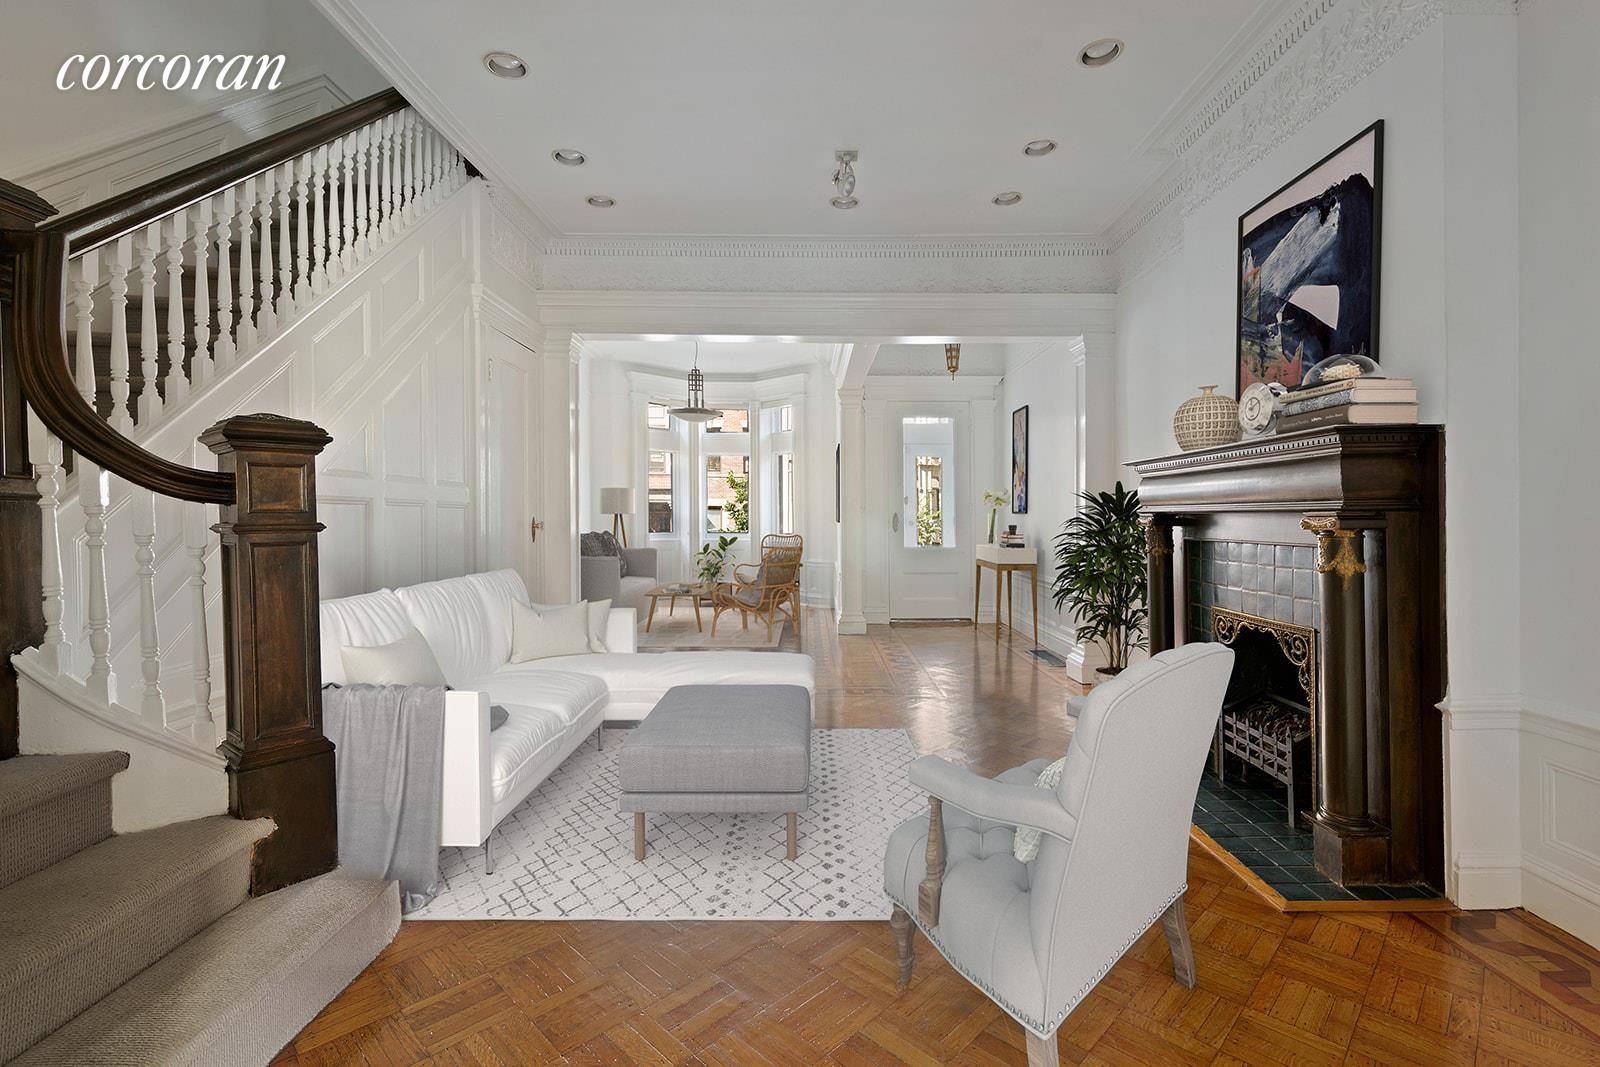 554 4th Street This Park Slope, Park block sweetheart has been lovingly restored and cherished for over 35 years by the current ownership.